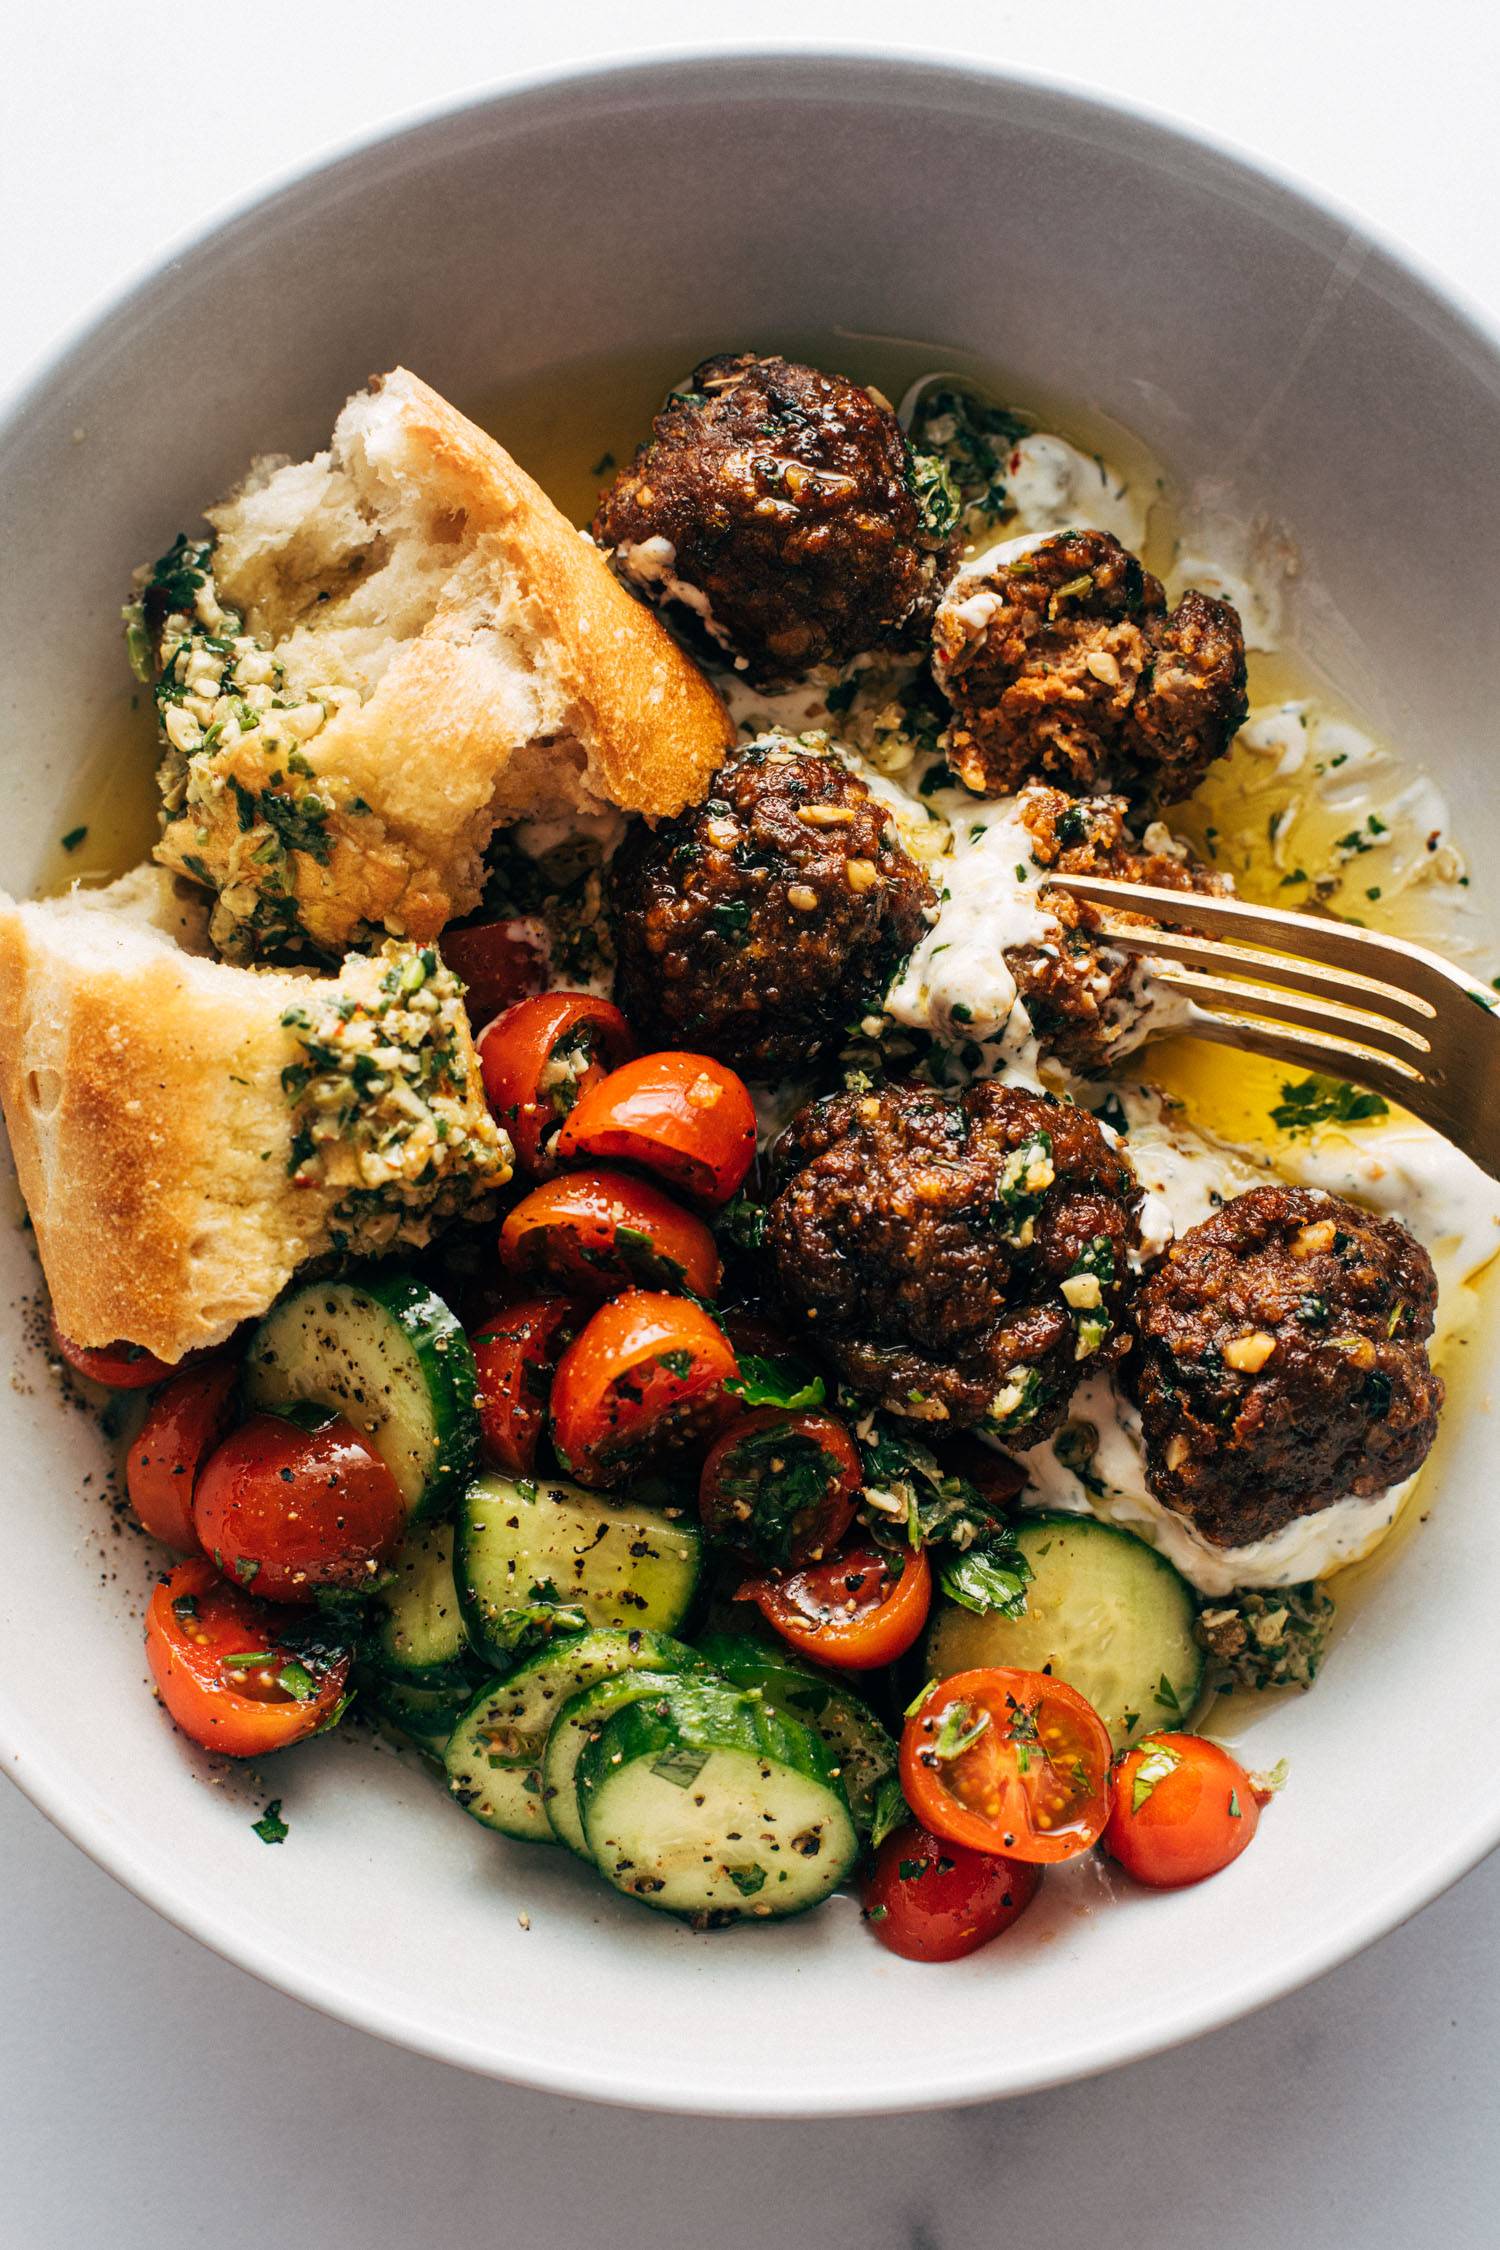 Meatballs in a bowl with a tomato salad and bread